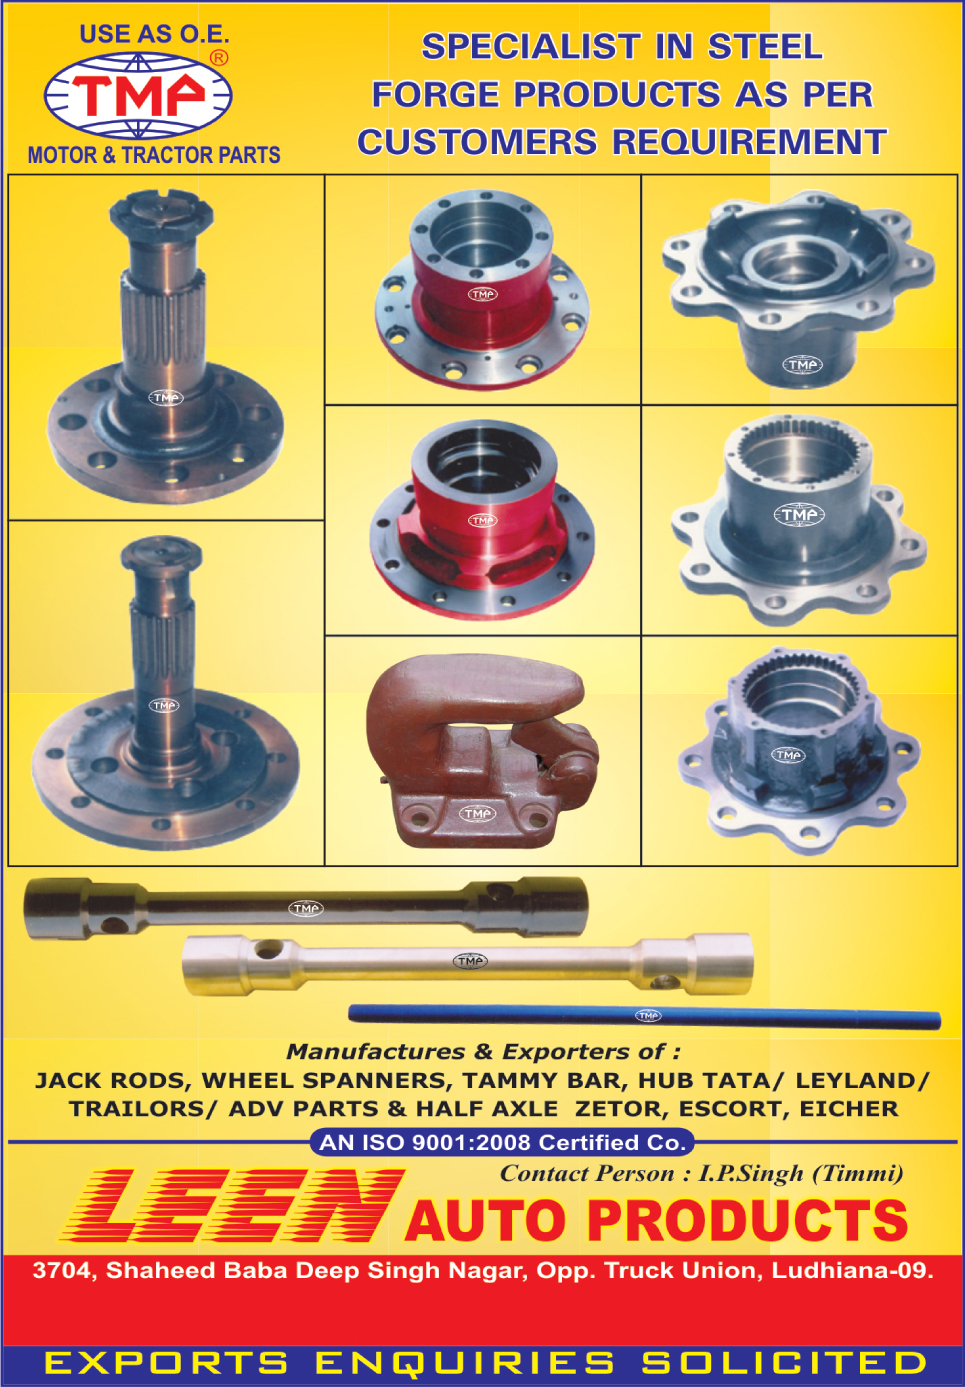 Jack Rods, Wheel Spanners, Tammy Bars, Truck Hubs, Trailer Hubs, Tractor Half Axle, Tractor Parts, Automotive Steel forge Products, Customized Steel Forge Products,Engine Motors, Auto Spare Parts, Tie Rod Ends, Tie Rod Sleeves, Automotive Motor Parts, Tractor Parts, Trailer Parts, ADV Parts, Bracket Cap, Brackets